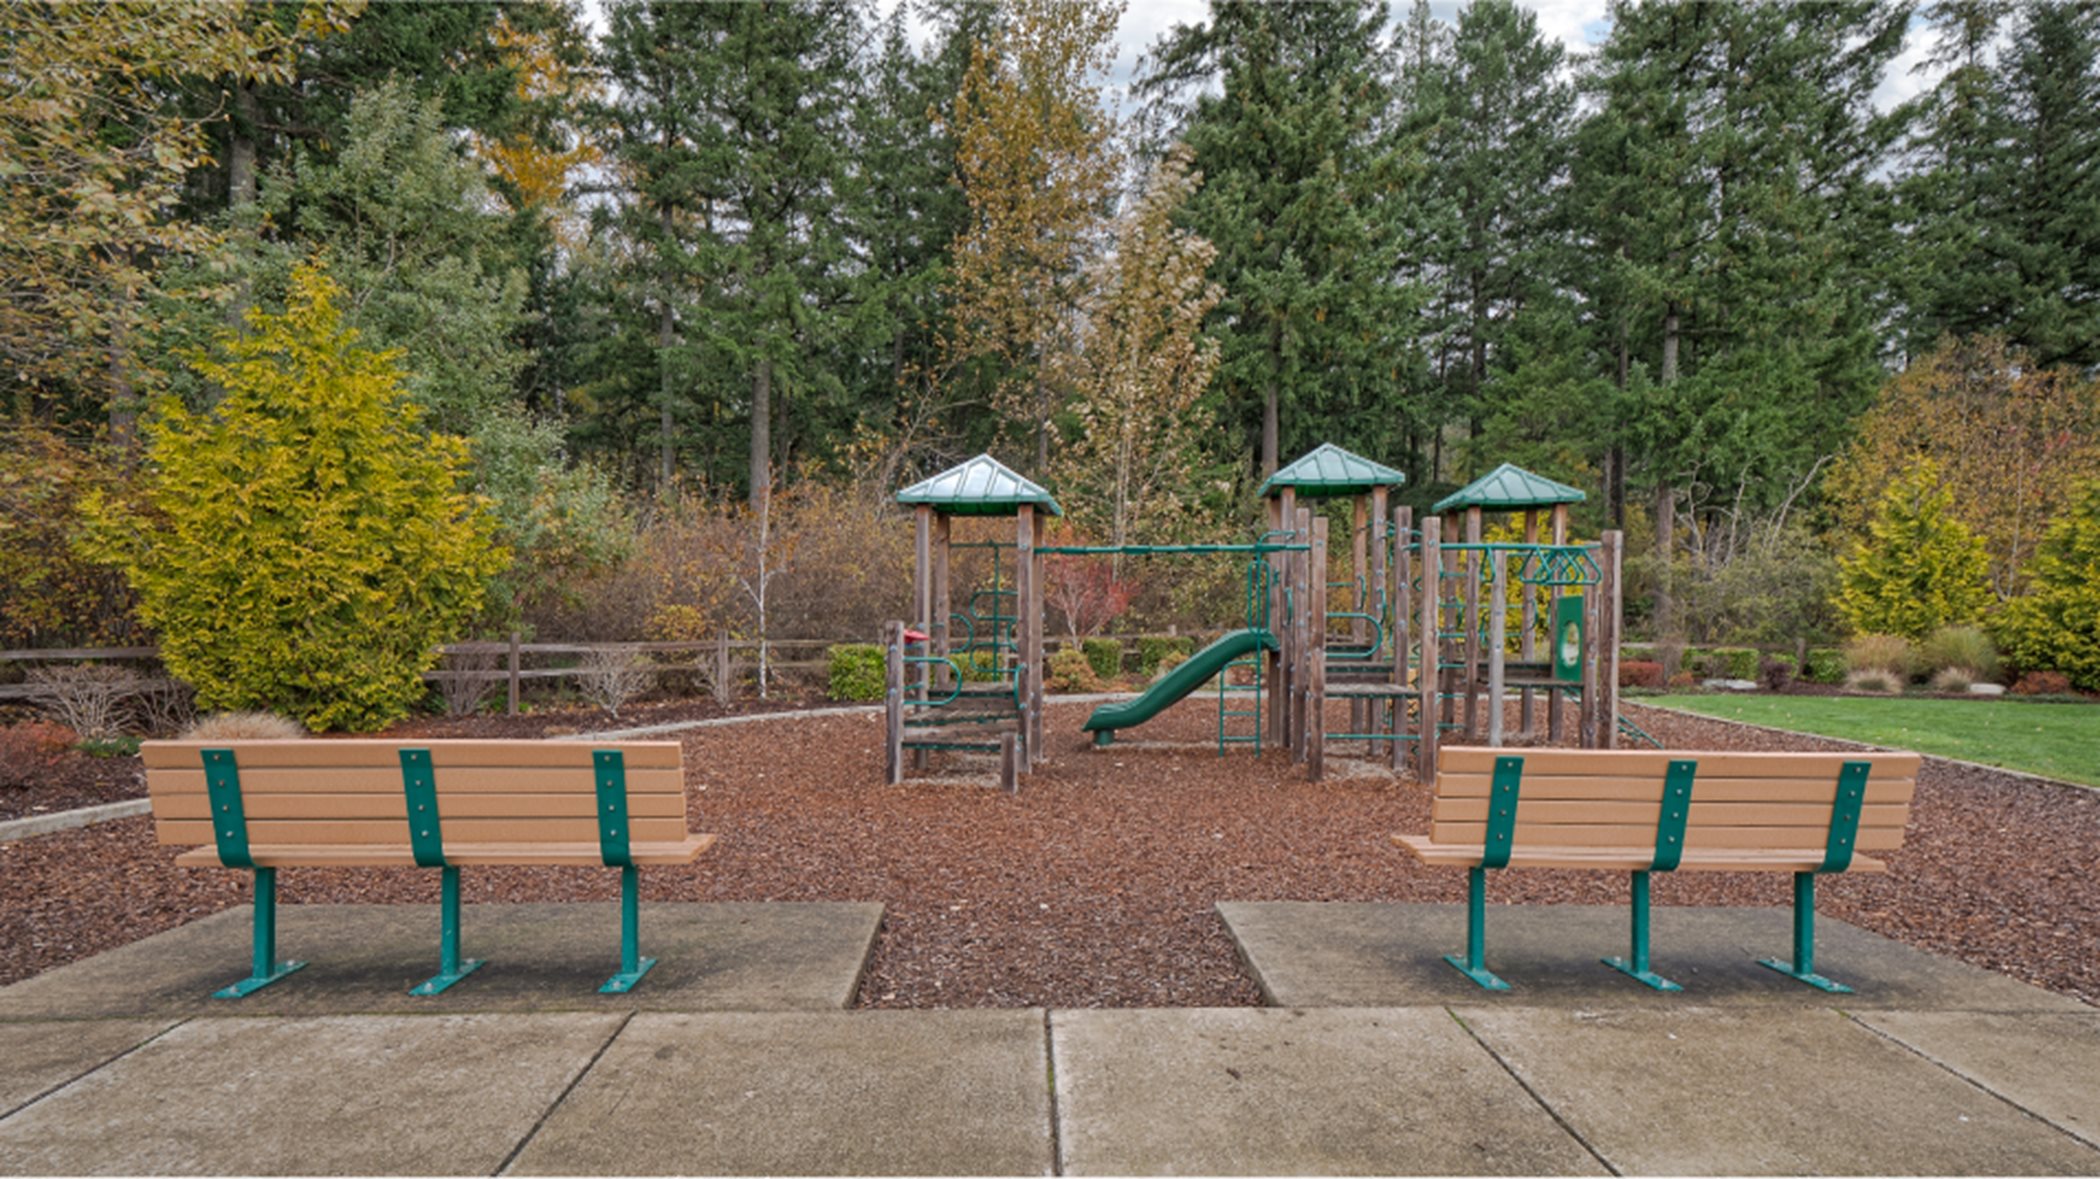 Playground with benches